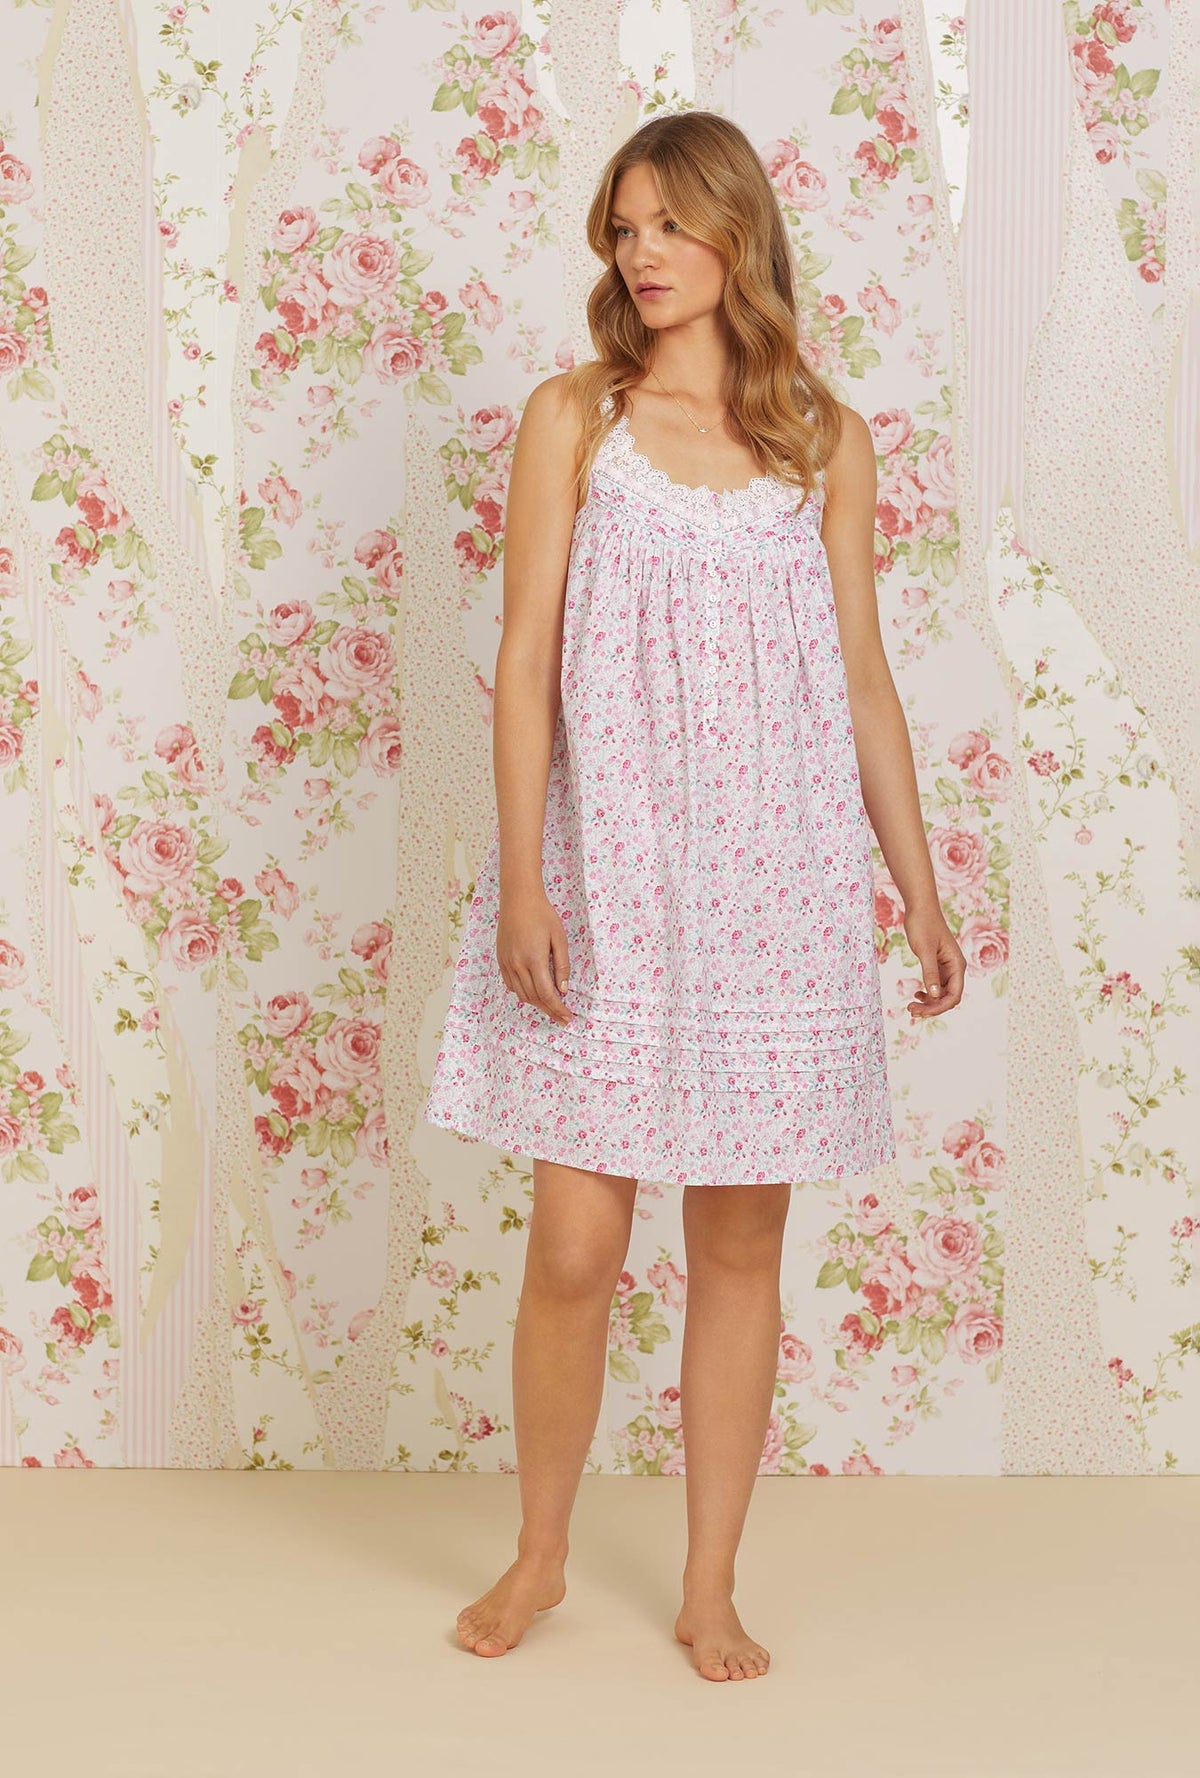 A lady wearing pink sleeveless eileen cotton chemise with secret garden floral print.